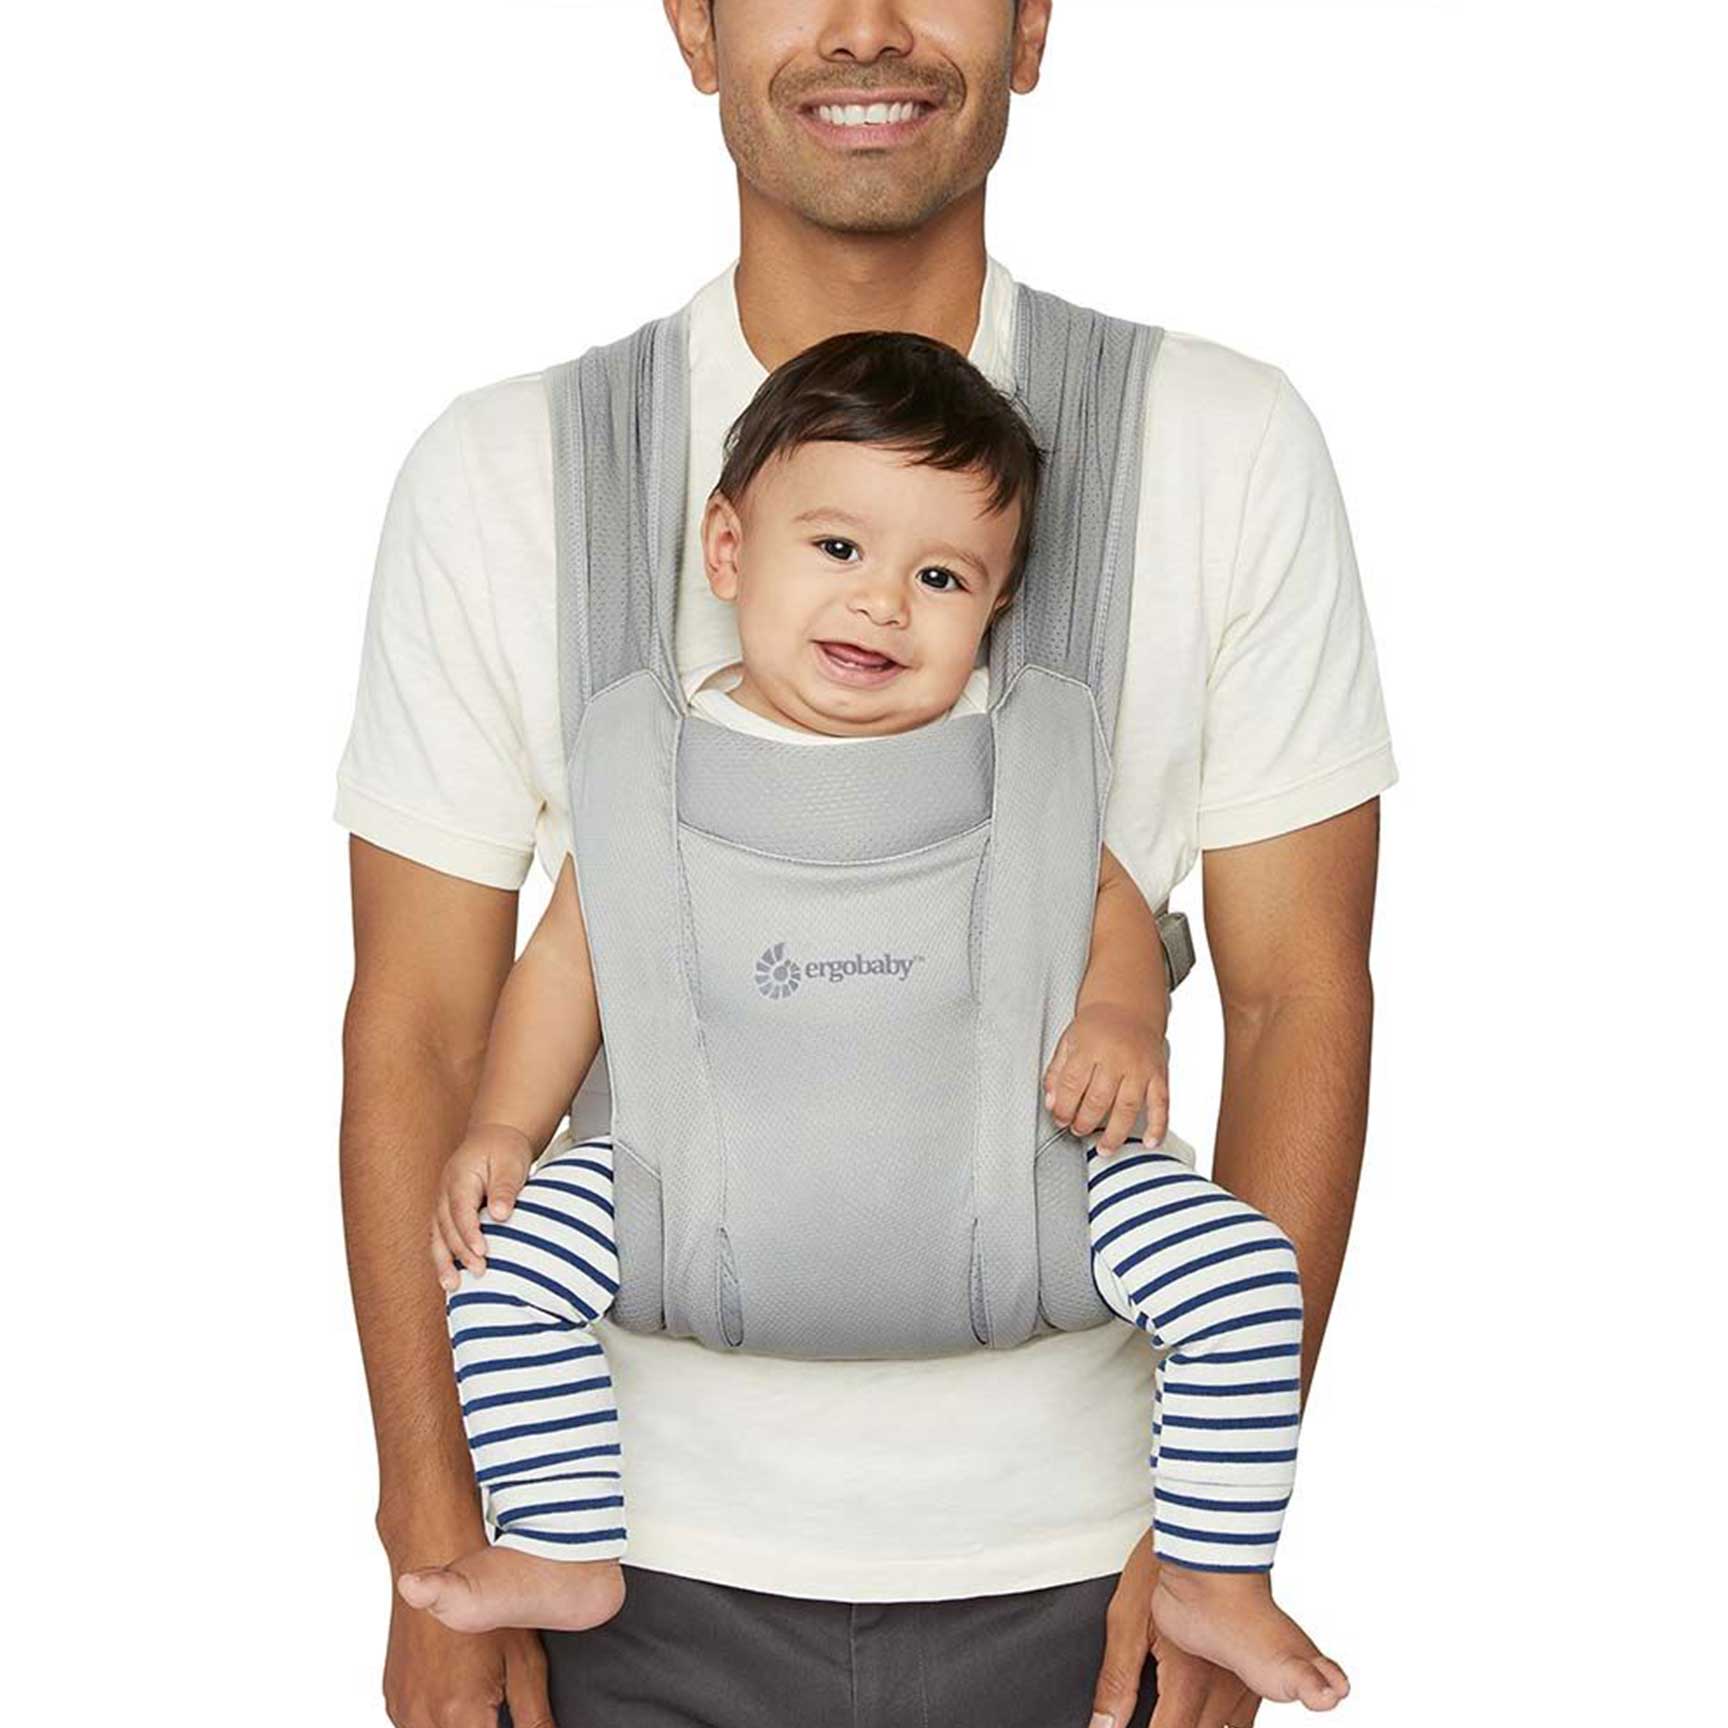 Ergobaby baby carriers Ergobaby Embrace Soft Air Mesh - Soft Grey BCEMASAMGRY